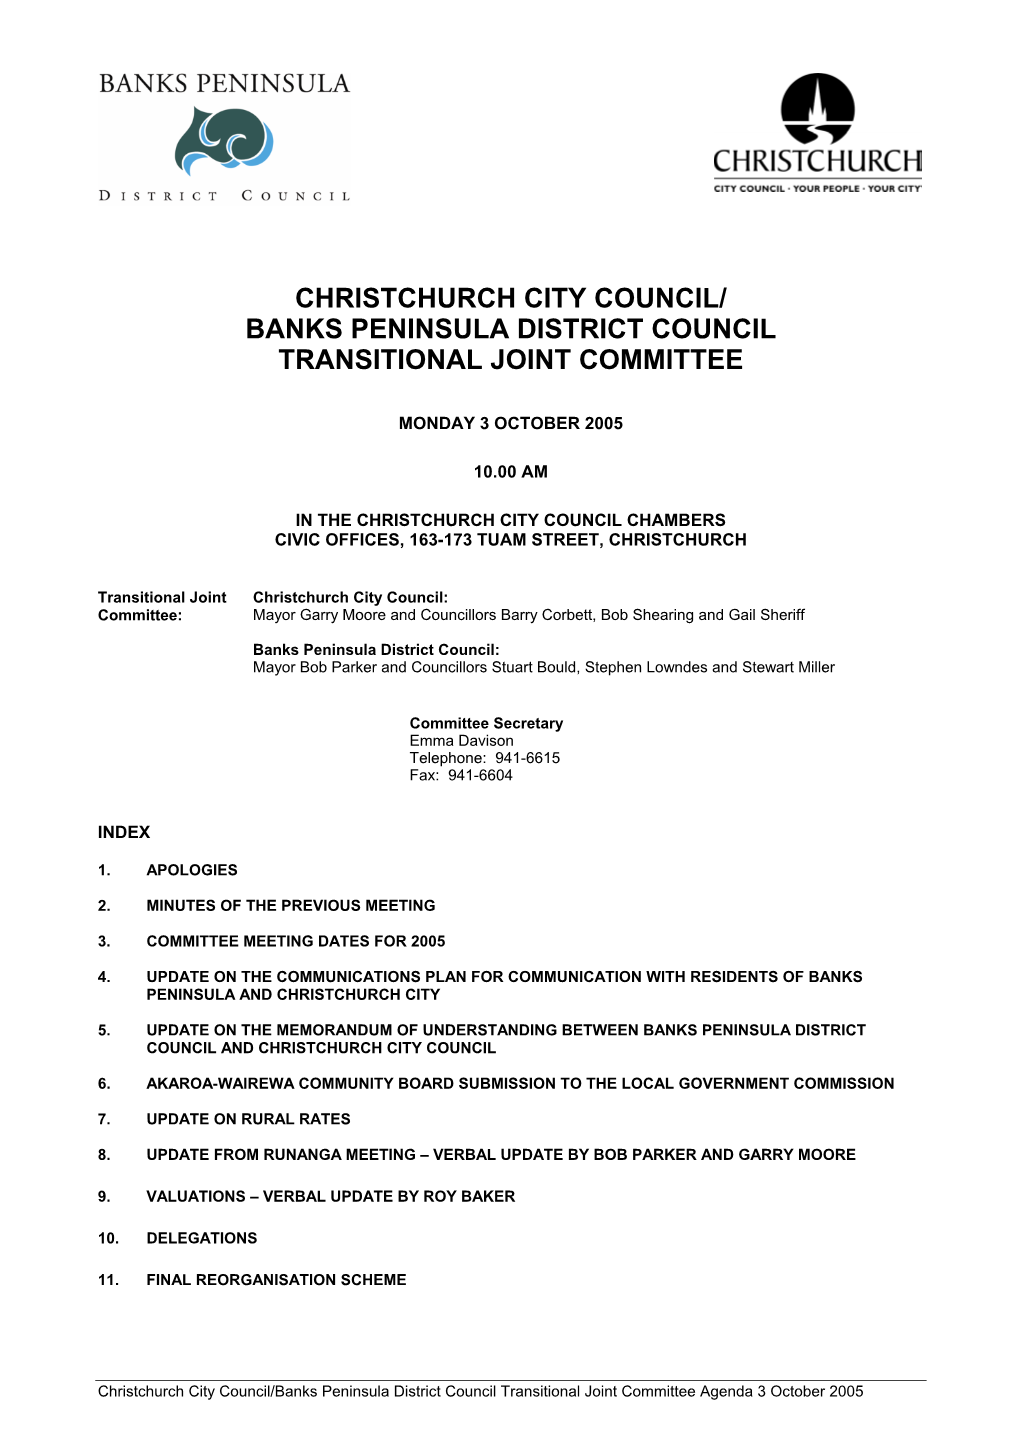 Banks Peninsula District Council Transitional Joint Committee